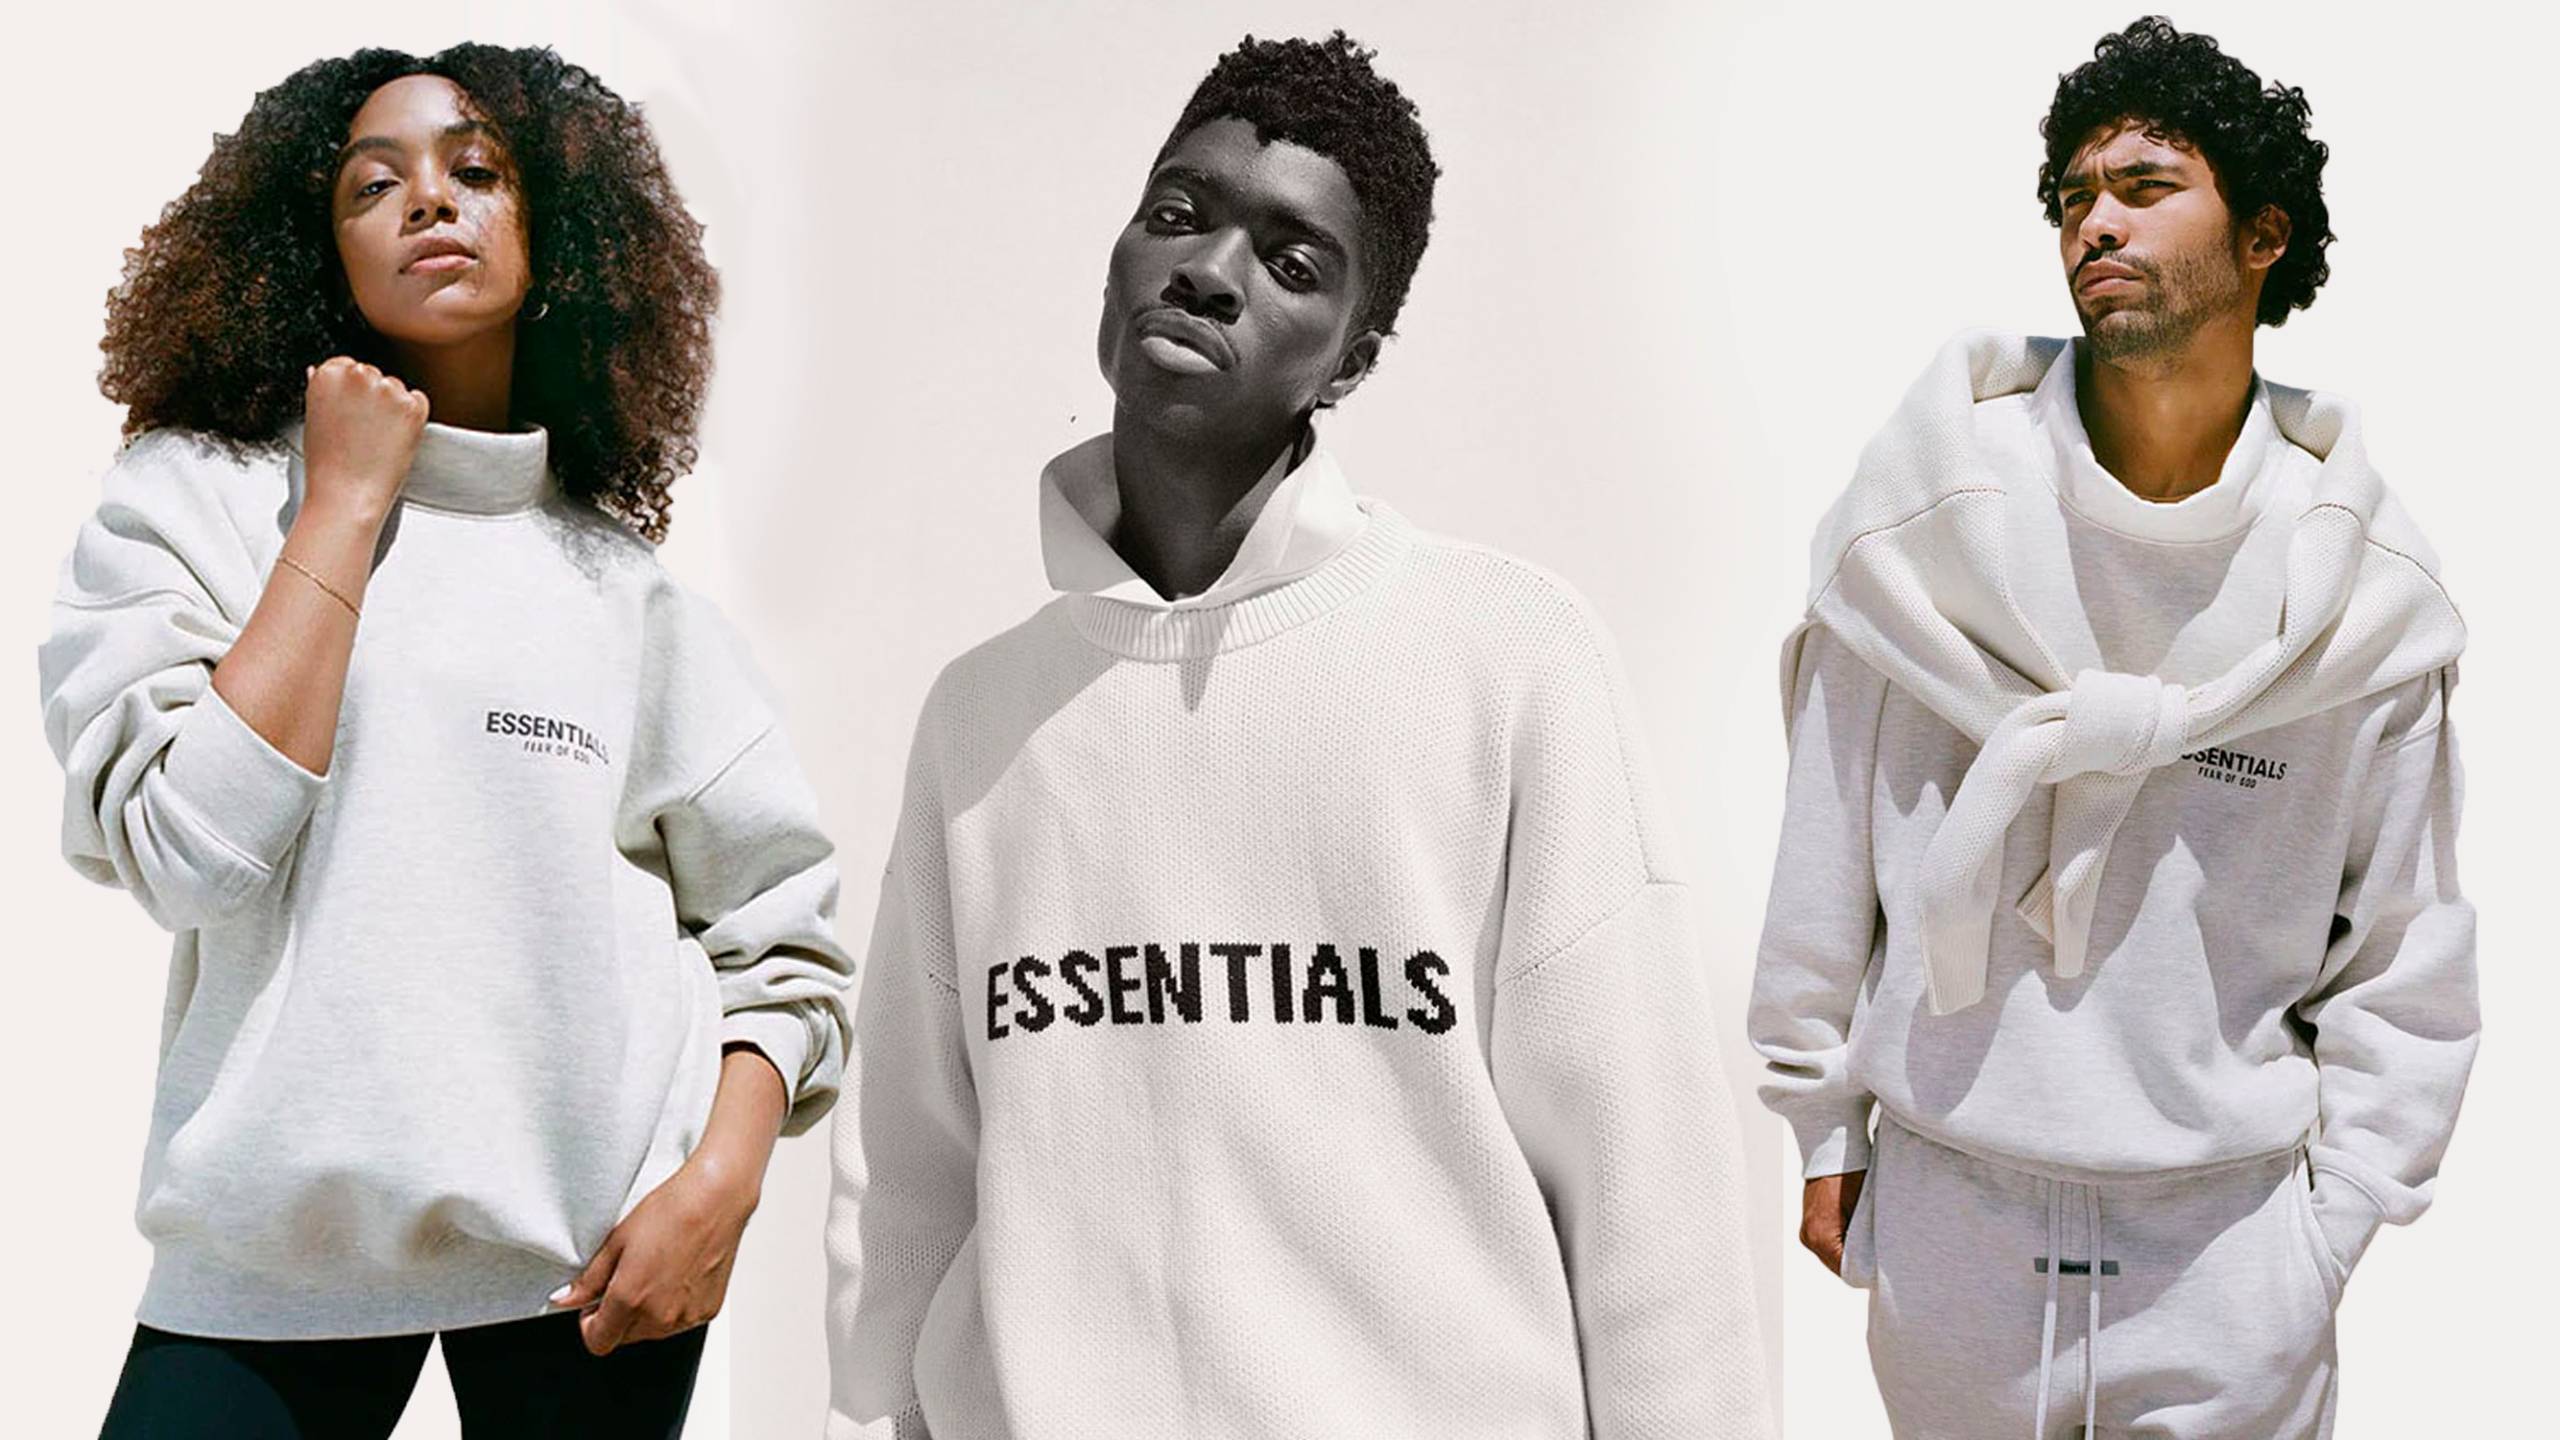 The Fear of God ESSENTIALS Collection is Available for Closer to 